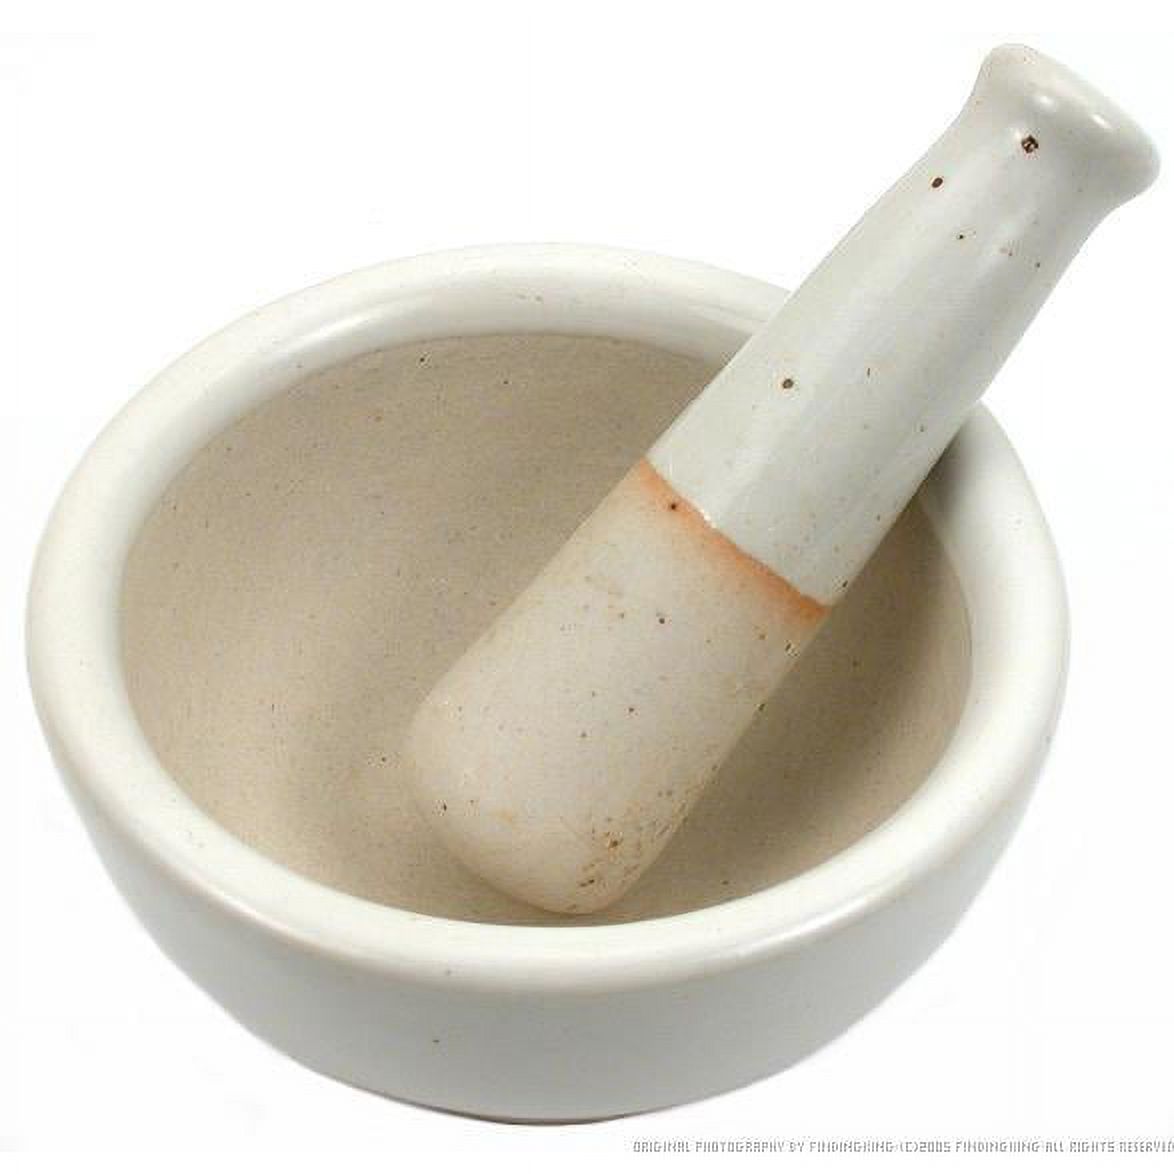 SMALL MORTAR AND PESTLE SET - image 1 of 3